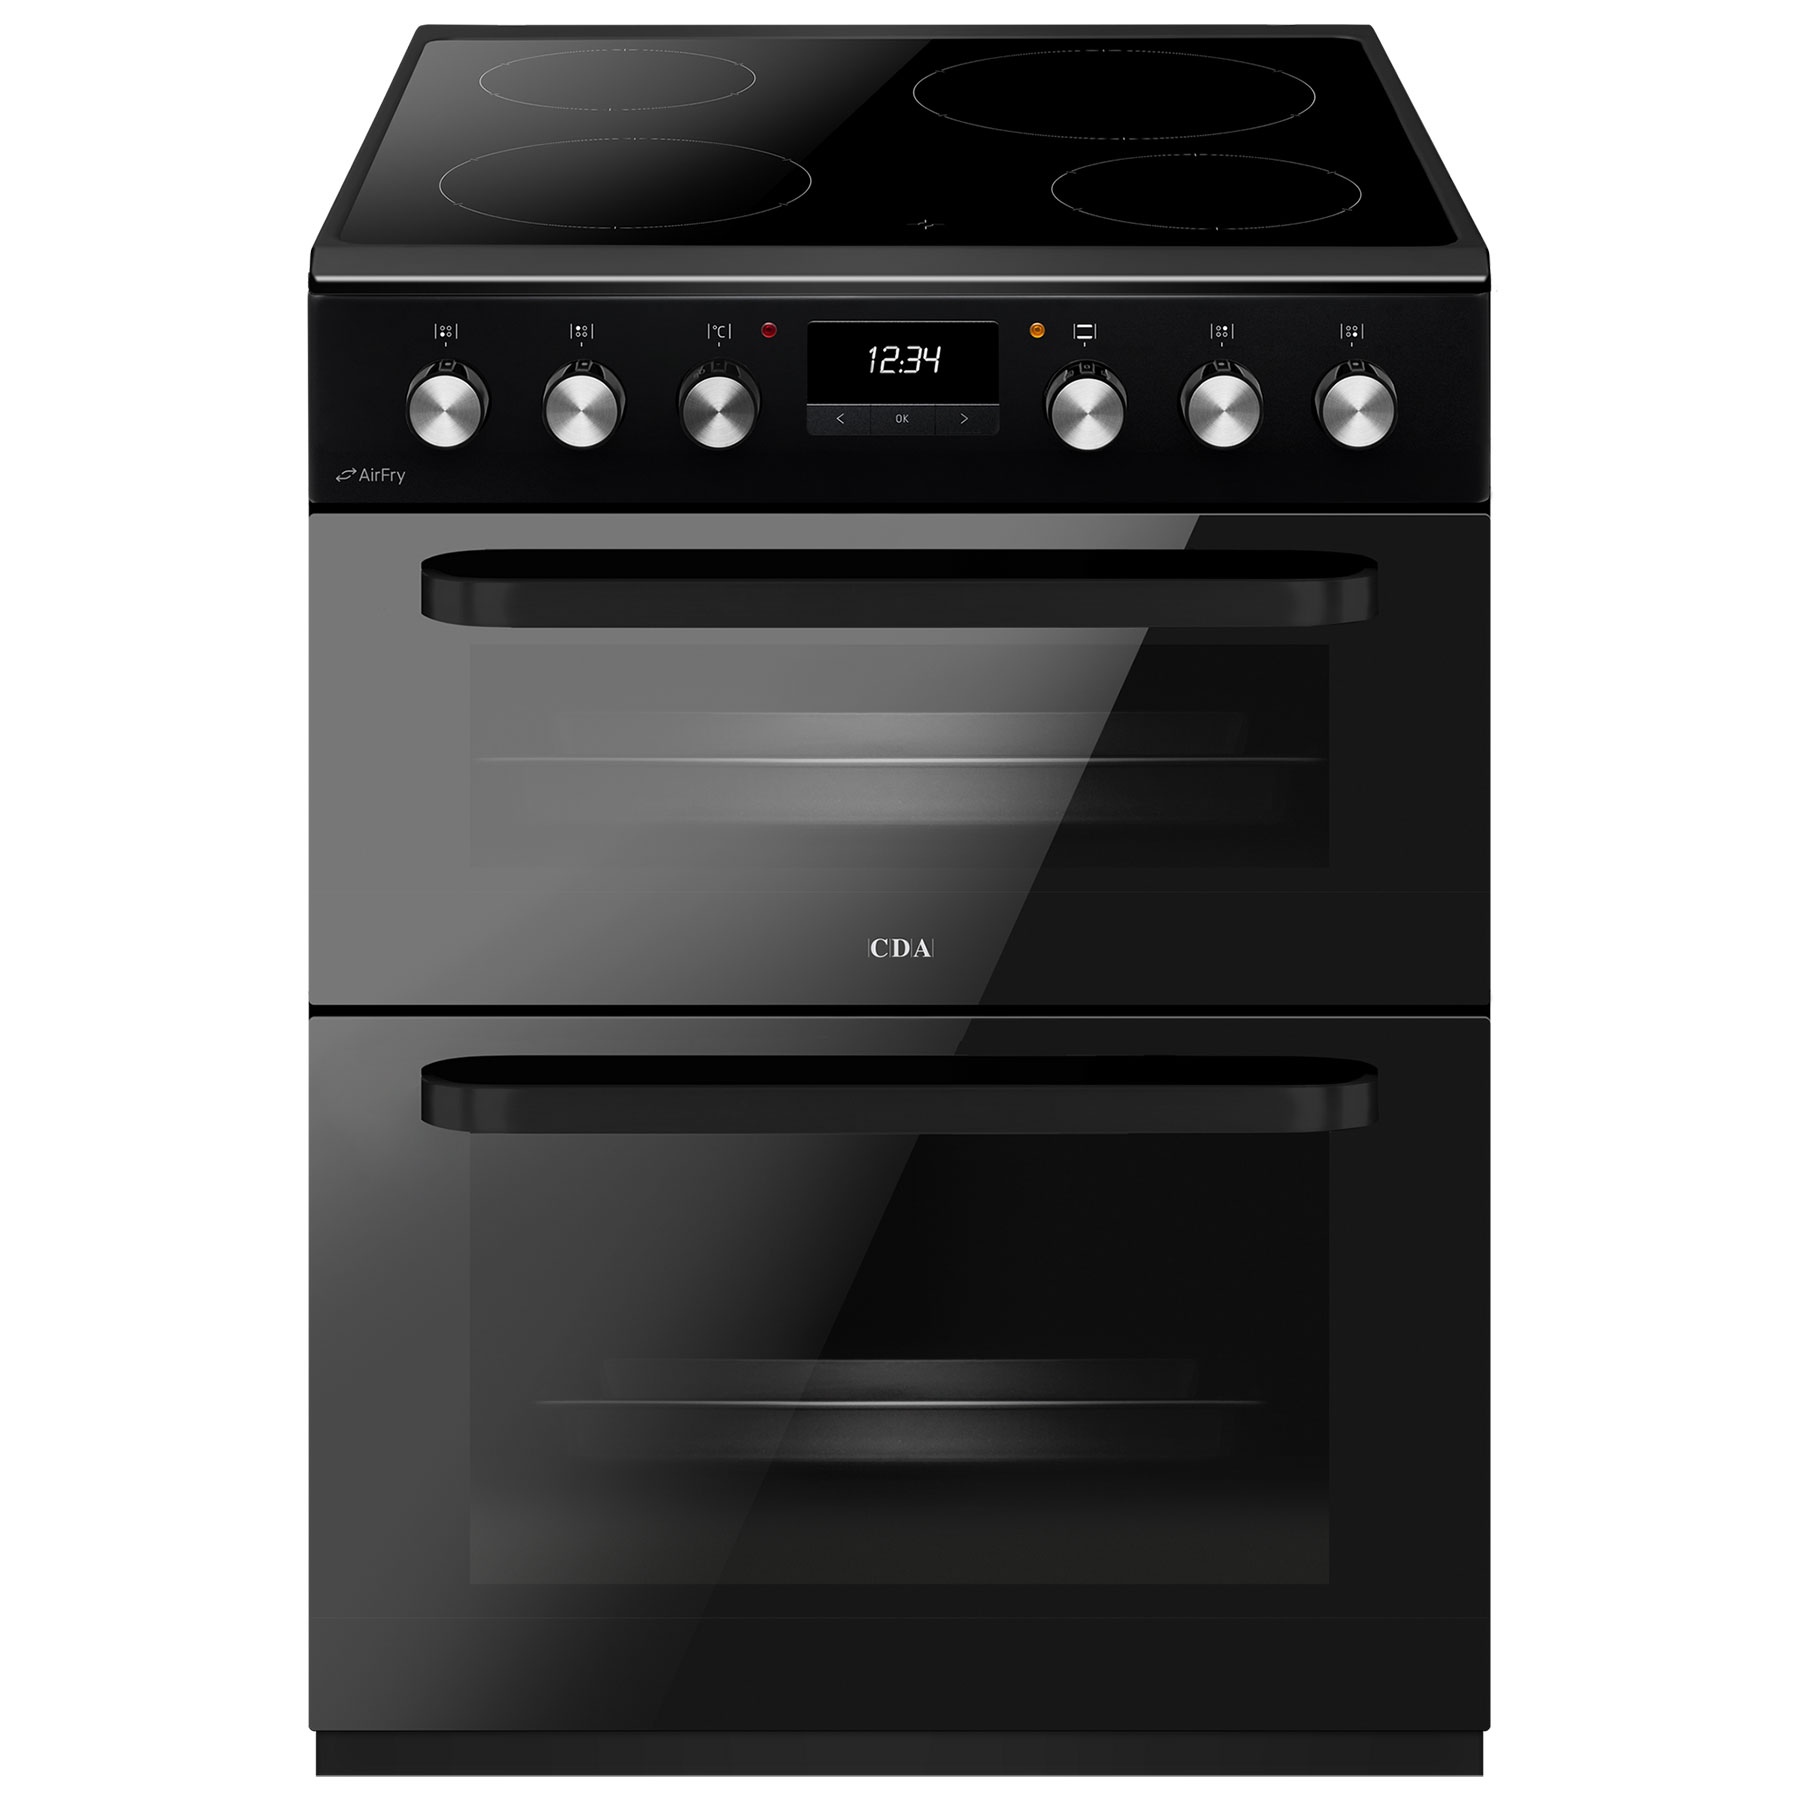 Image of CDA CFC631BL 60cm Electric Cooker in Black Double Oven Ceramic Hob